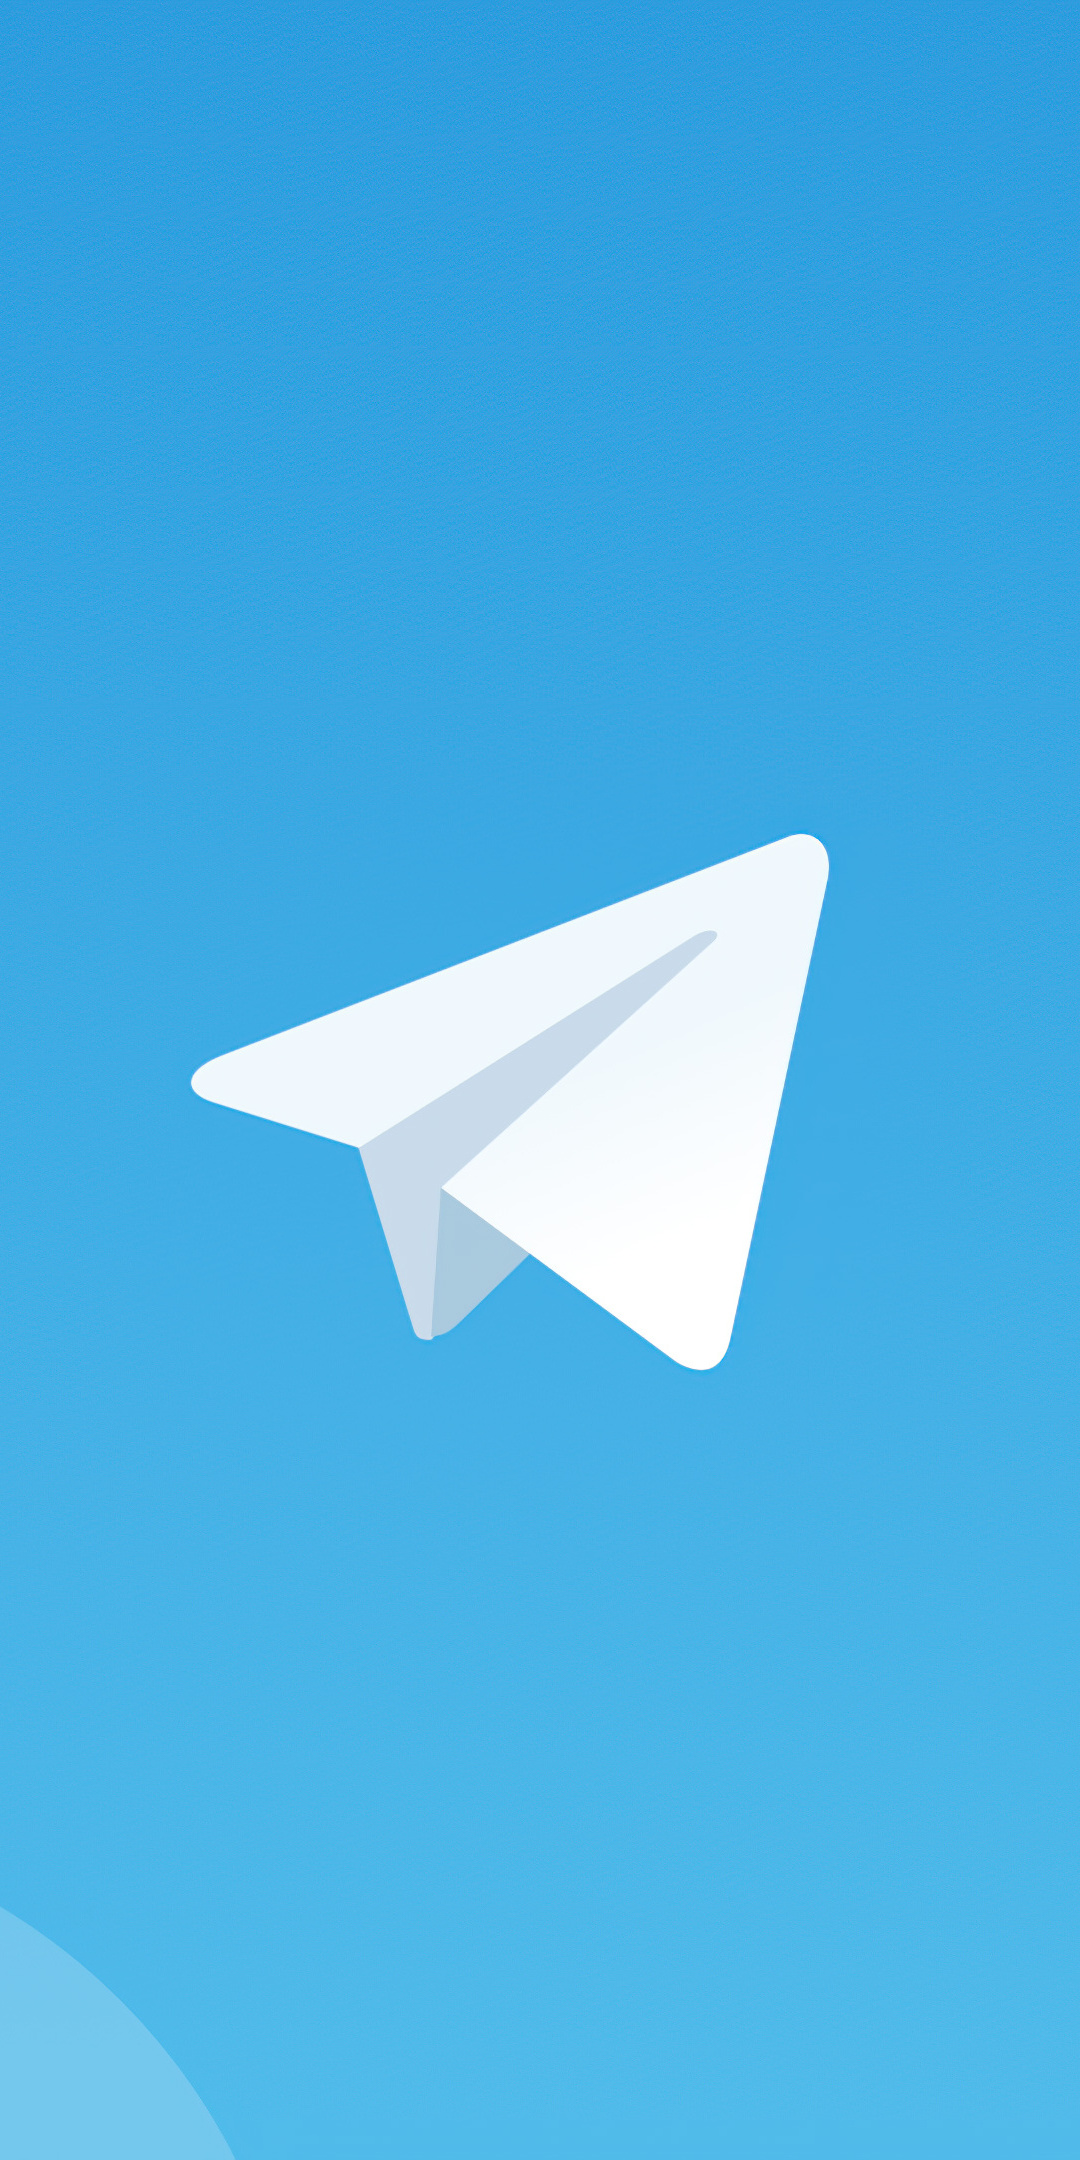 1080x2160 Telegram Logo Minimal 4k One Plus 5T,Honor 7x,Honor view 10,Lg Q6  HD 4k Wallpapers, Images, Backgrounds, Photos and Pictures